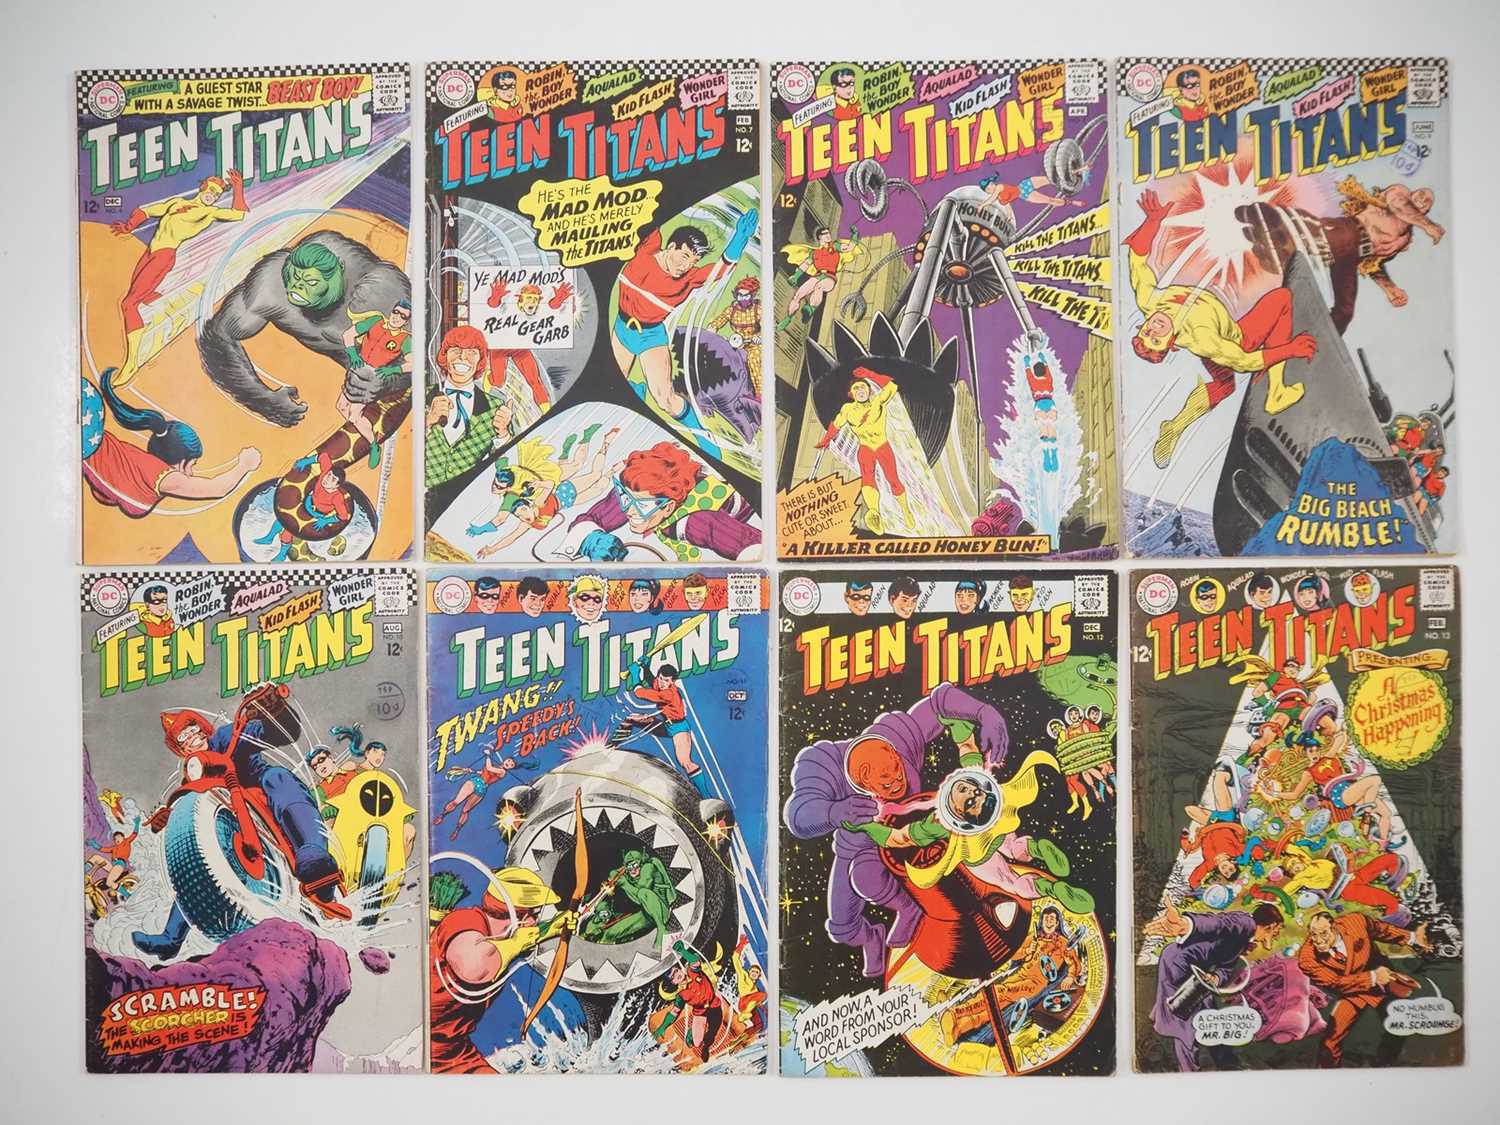 TEEN TITANS #6, 7, 8, 9, 10, 11, 12, 13 (8 in Lot) - (1966/1968 - DC) - Includes the first meeting